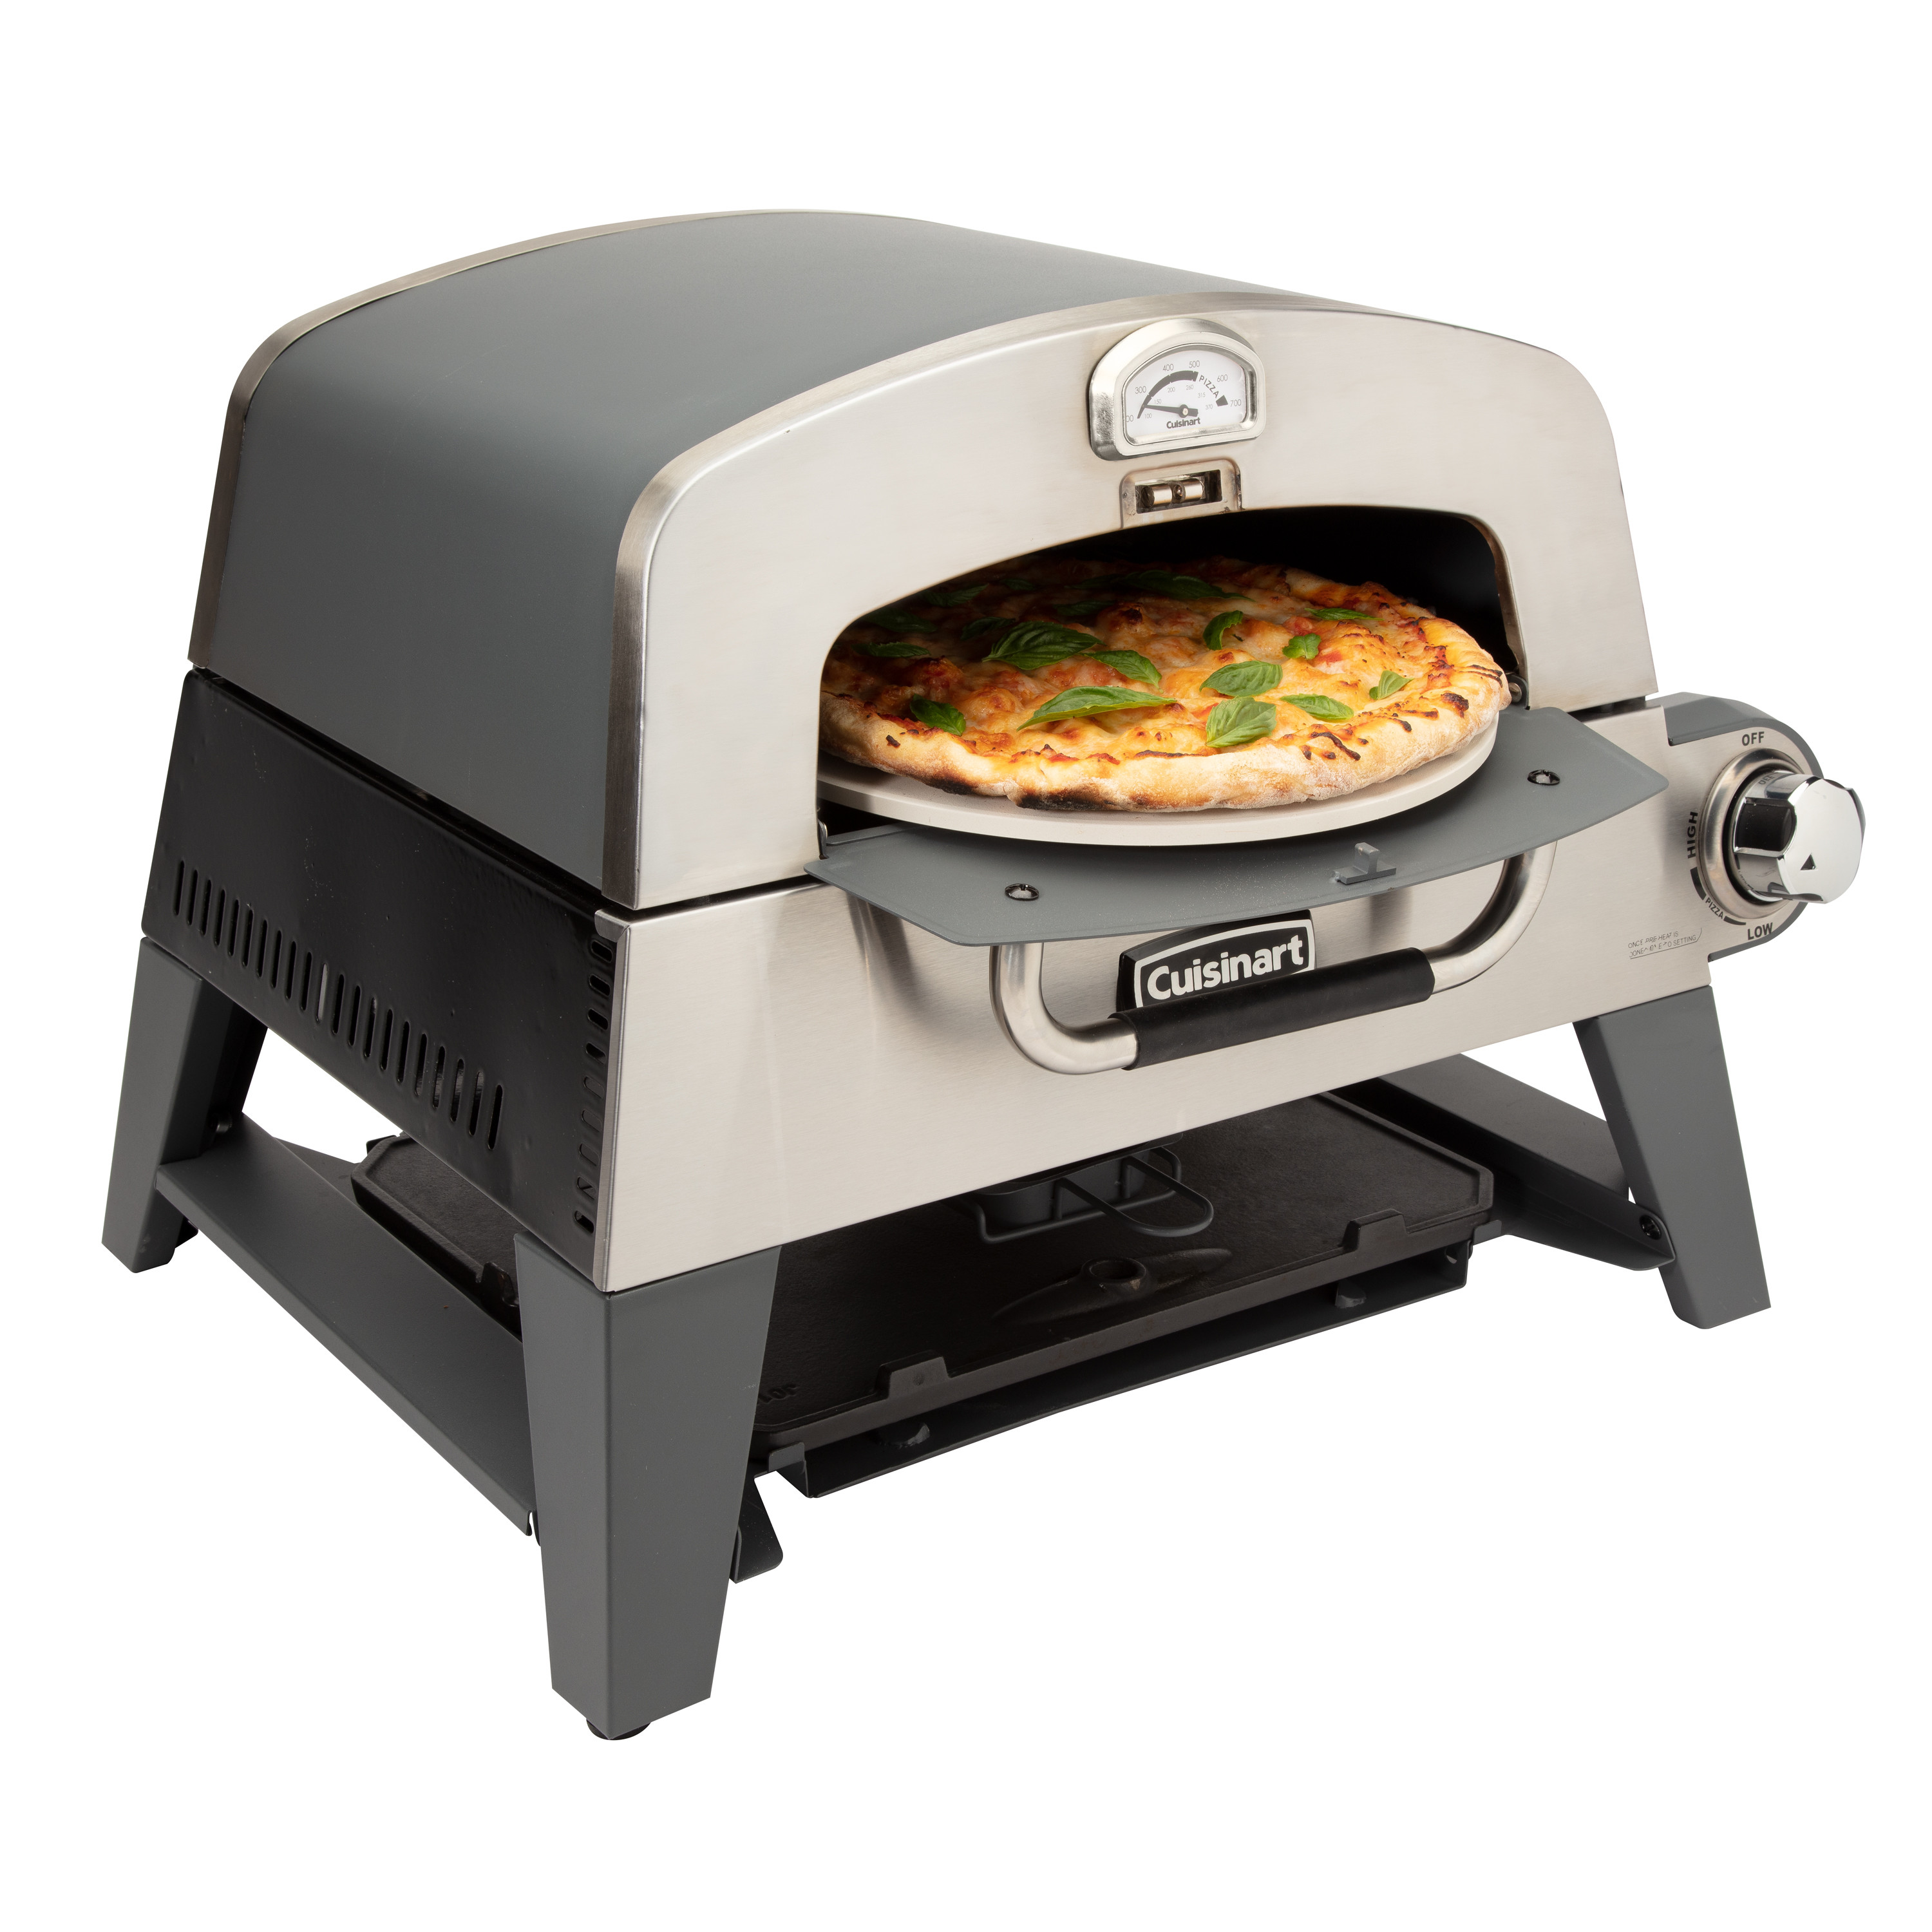 Angle View: Cuisinart - 3-in-1 Pizza Oven Plus, Griddle, and Grill - Gray